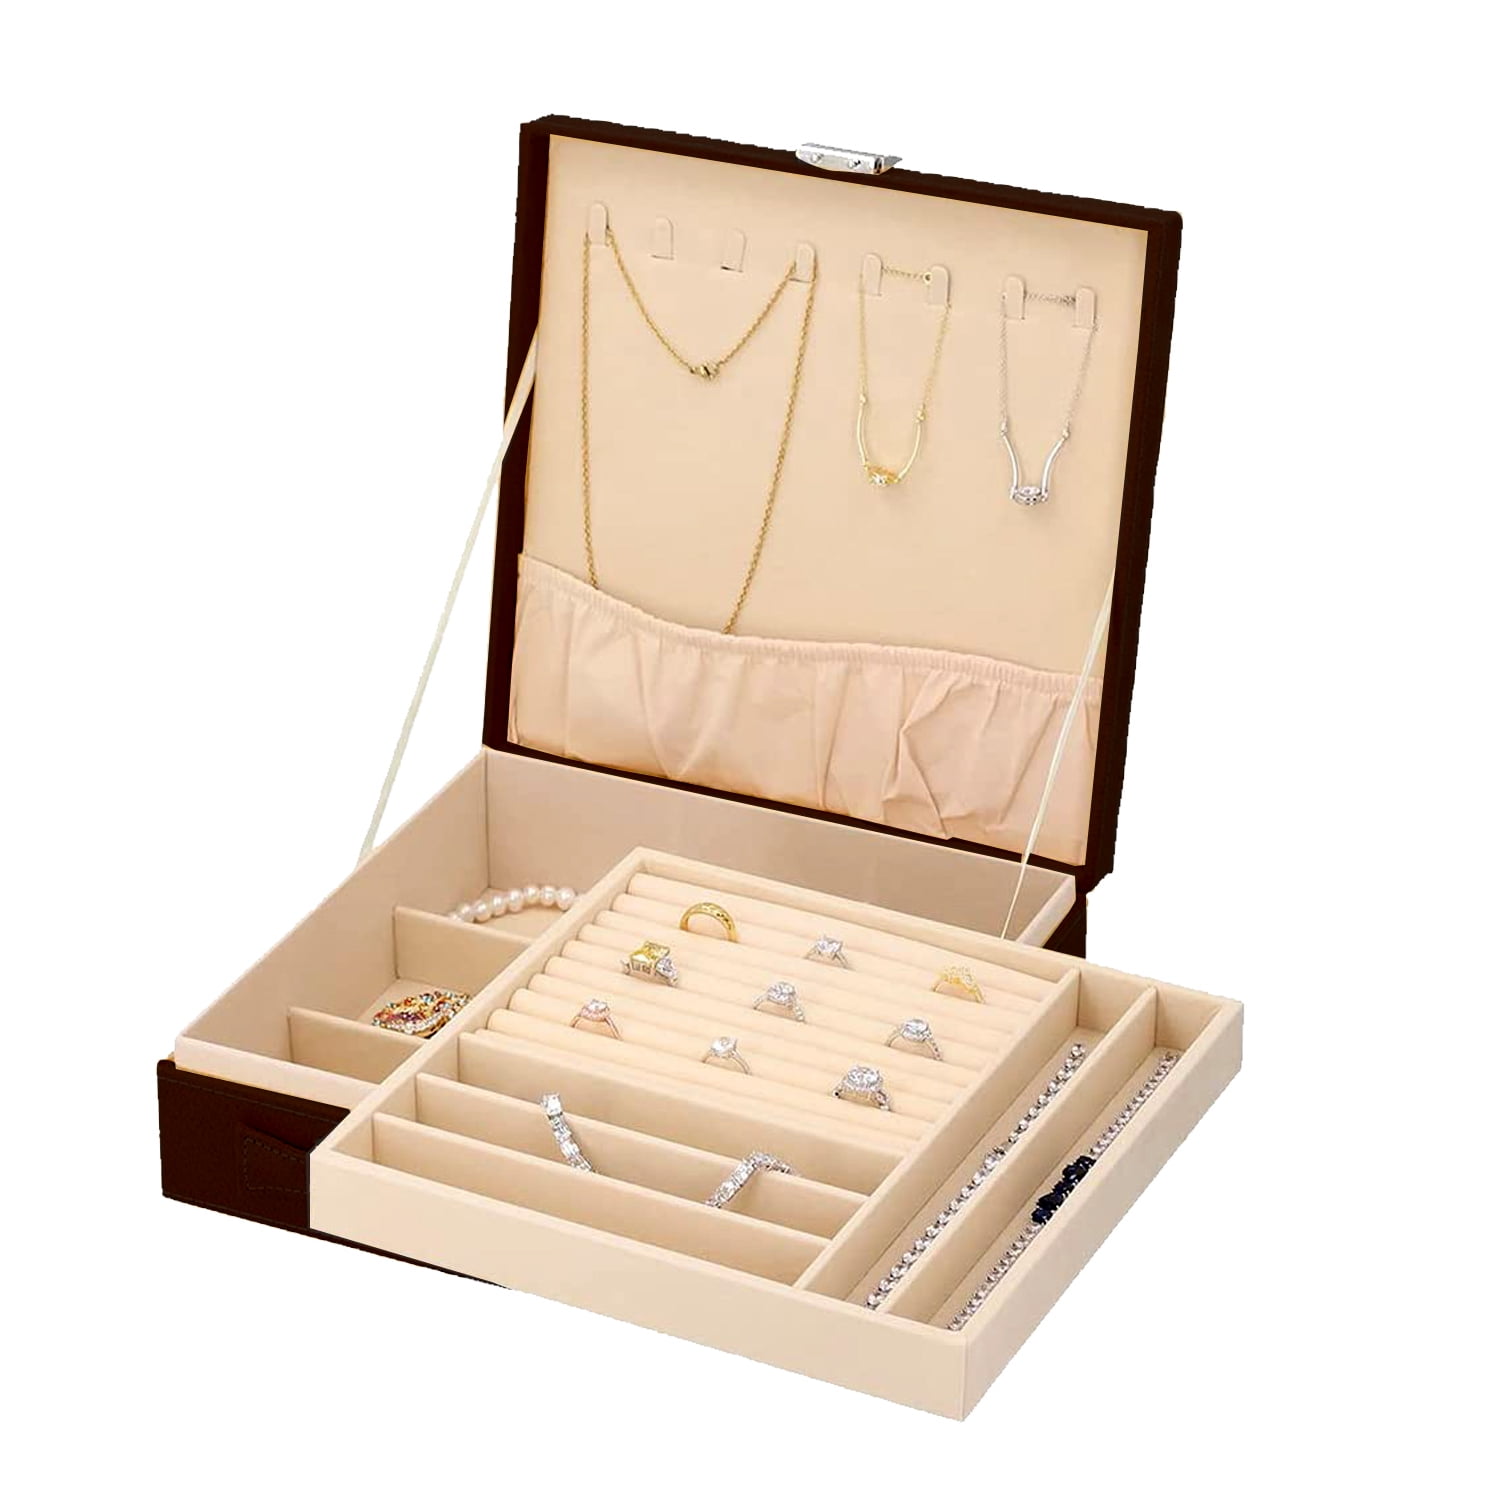 Dropship Jewelry Organizer Jewelry Box For Women Double Layer Travel For Necklace  Earring Rings PU Leather Jewelry Holder Case to Sell Online at a Lower  Price